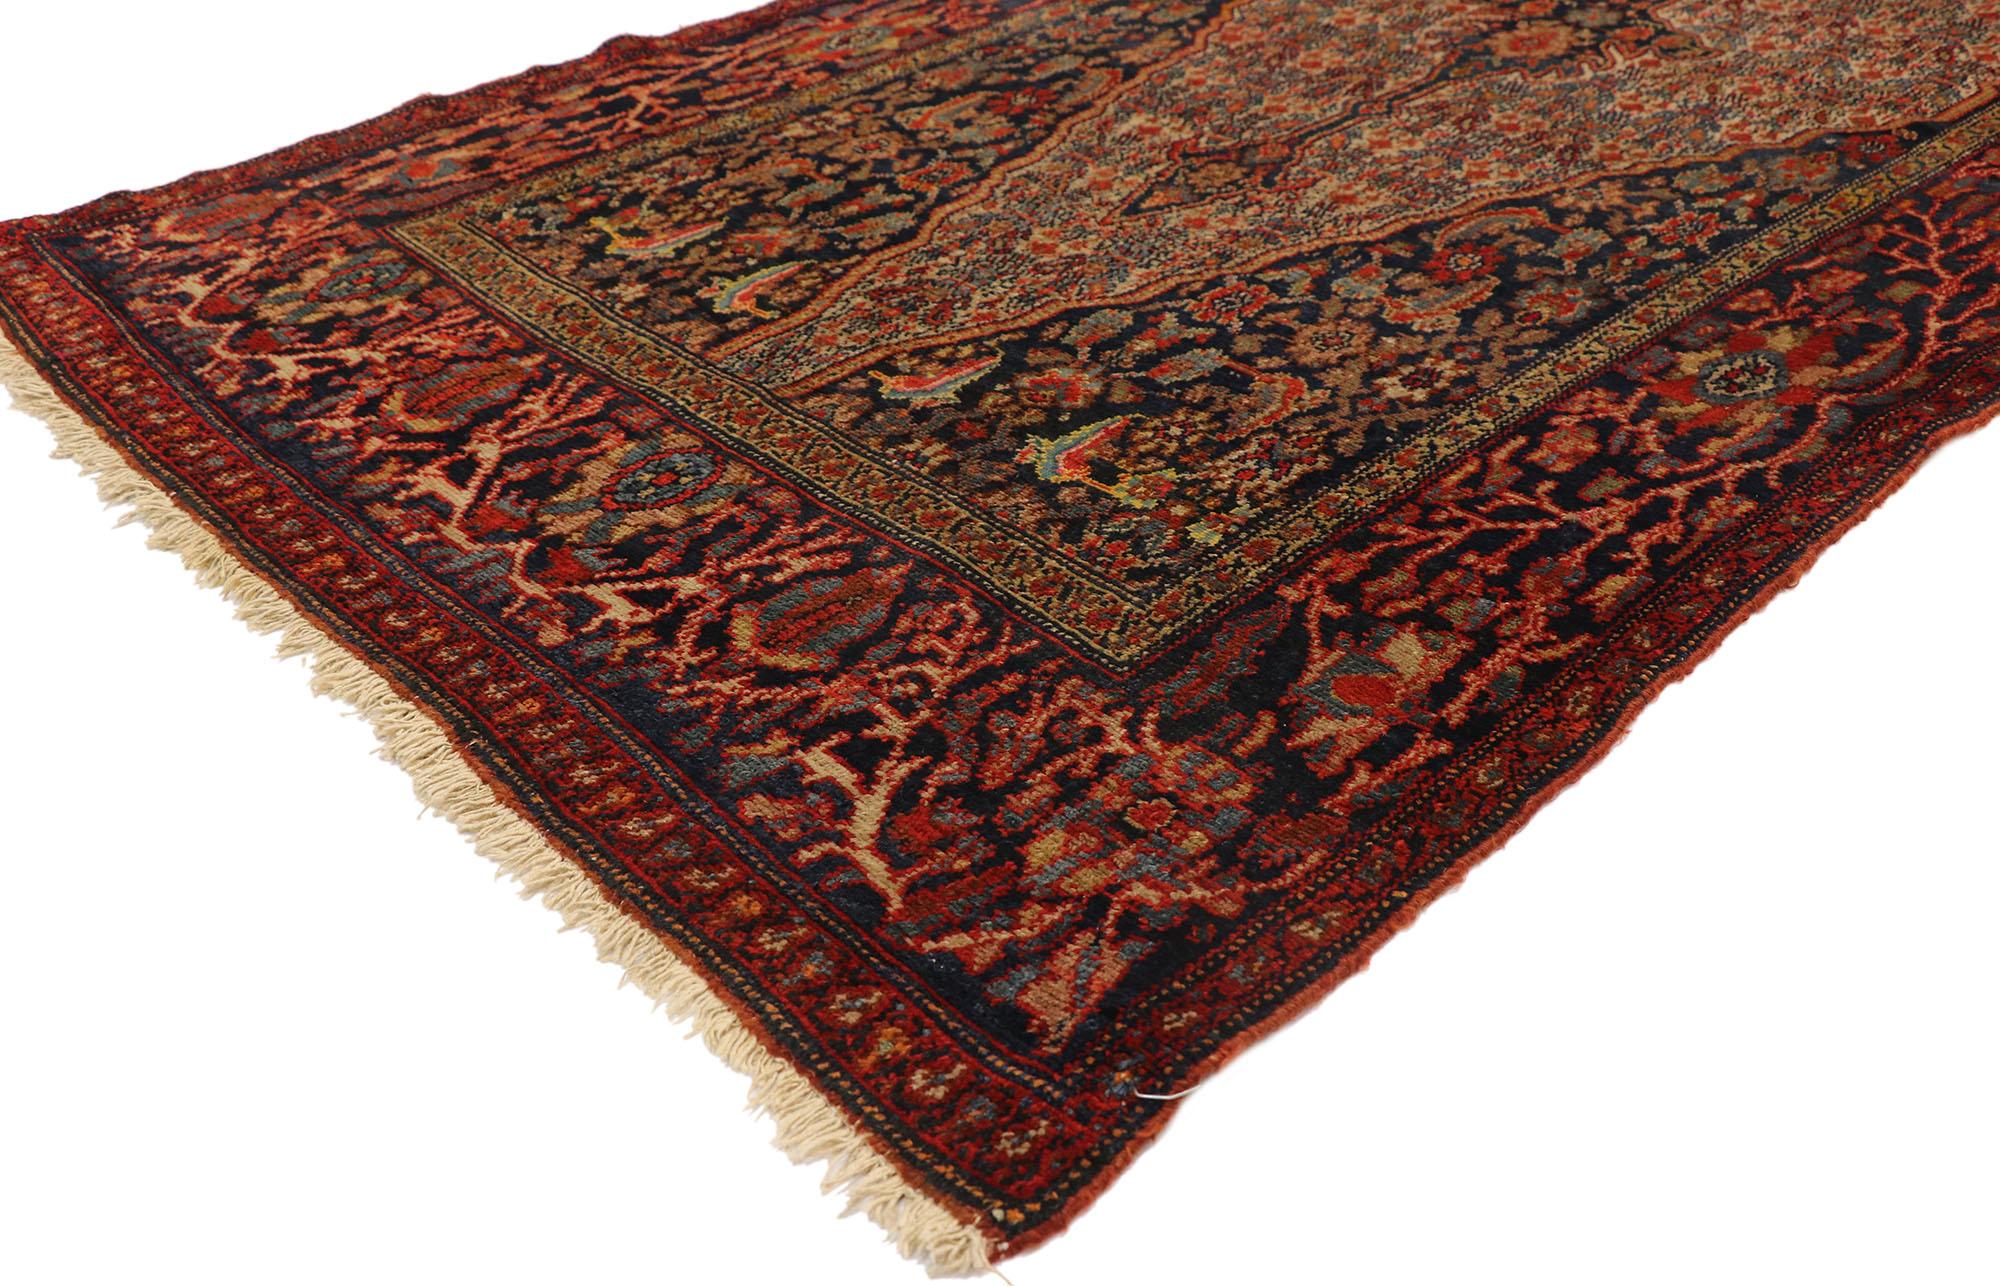 77398, antique Persian Senneh long hallway runner with Modern Victorian. With its well-balanced symmetry and refined color palette, this hand knotted wool antique Persian Senneh runner would bring a sense of nostalgic charm to nearly any space. It